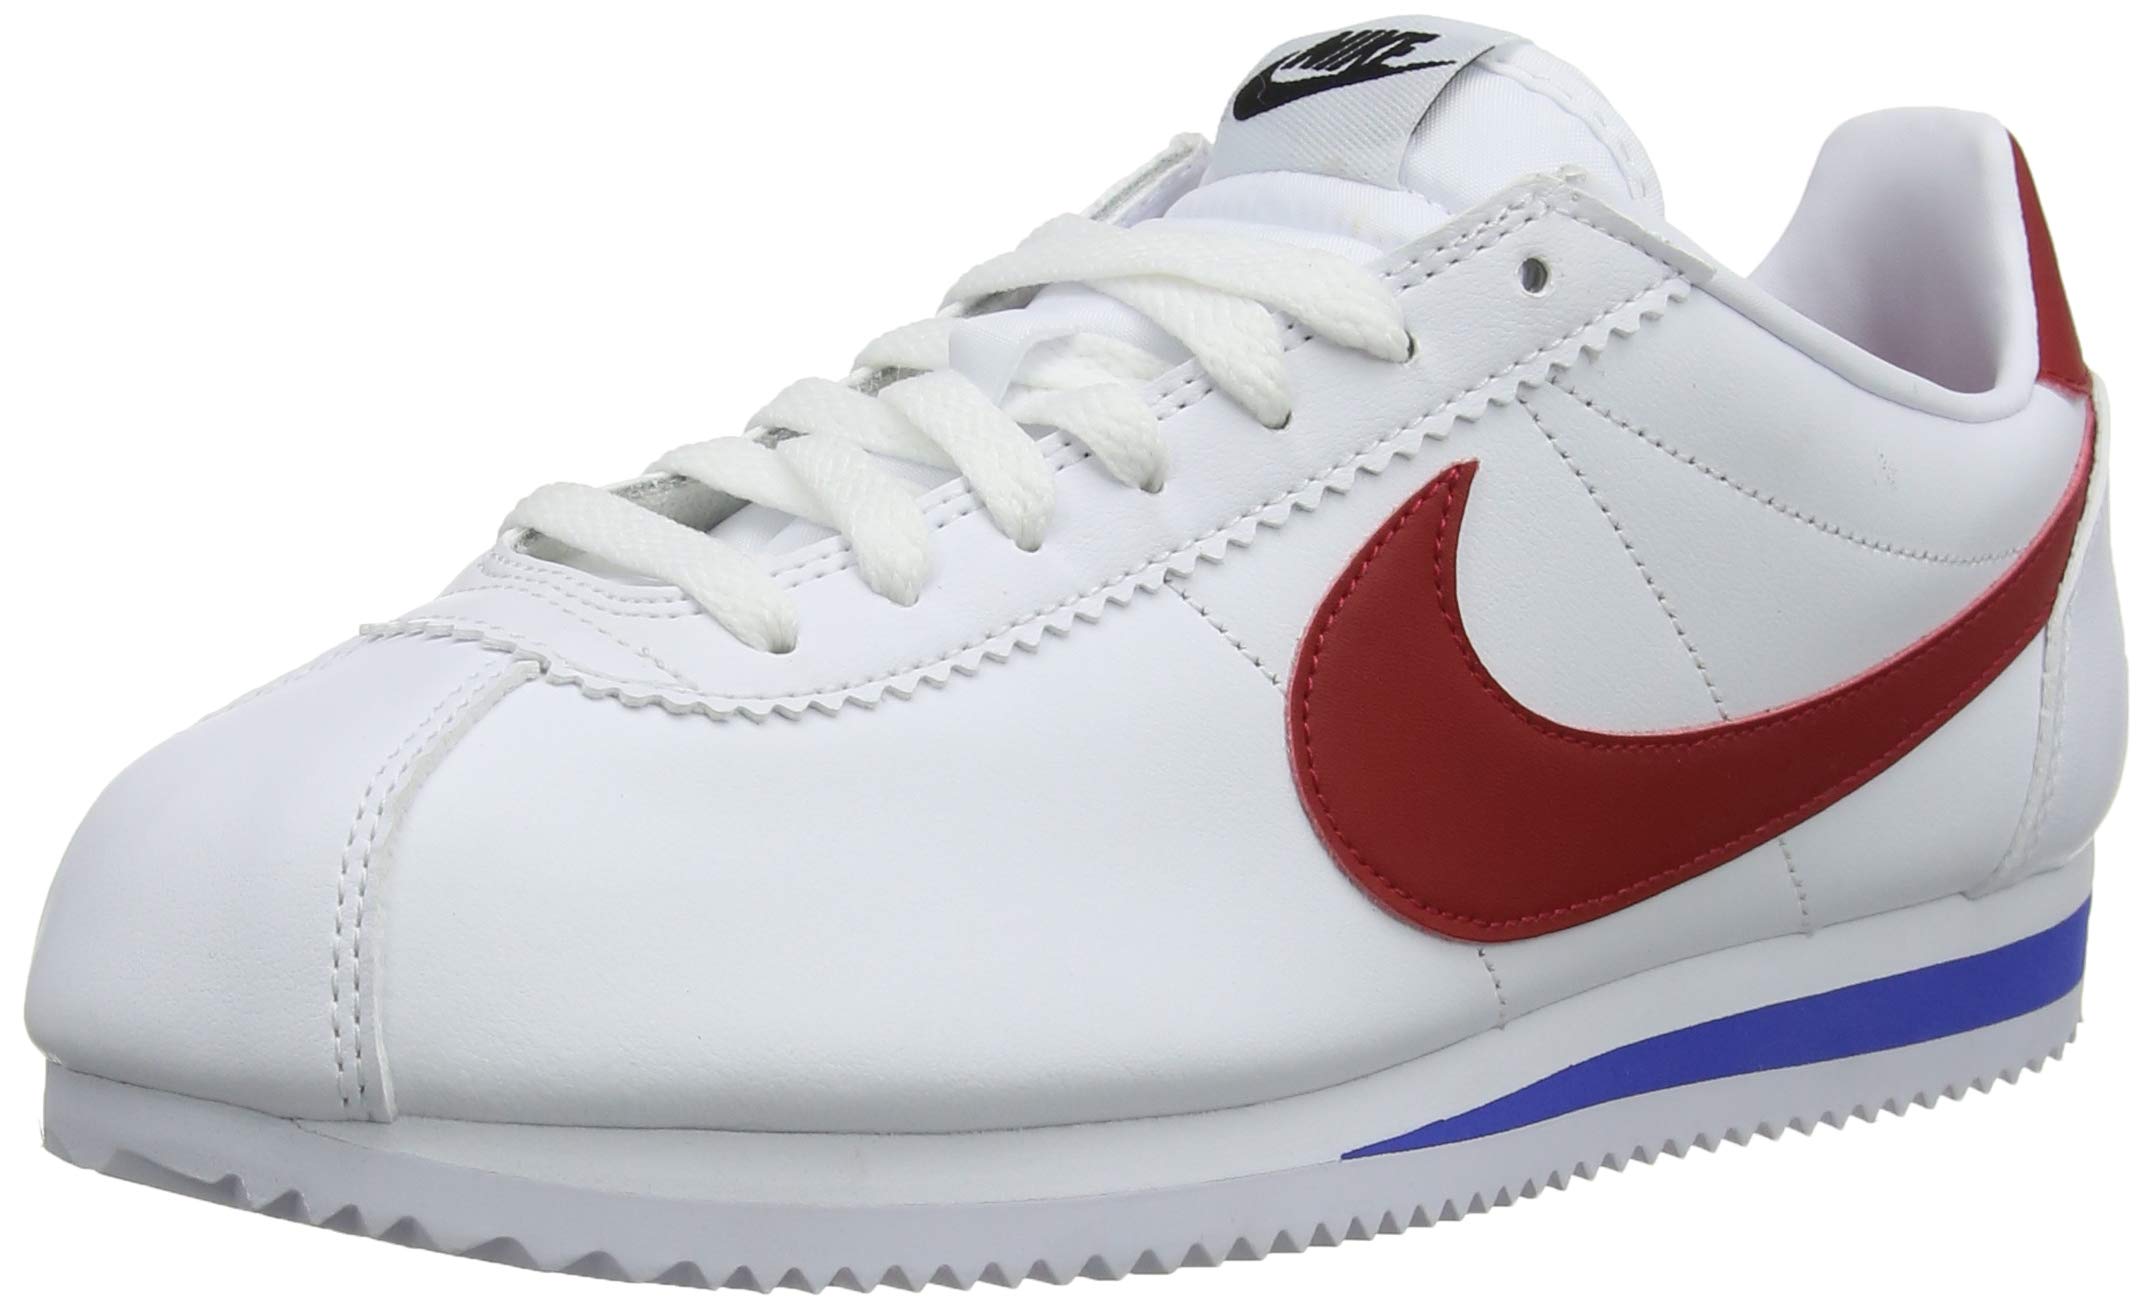 nike cortez leather trainers in white